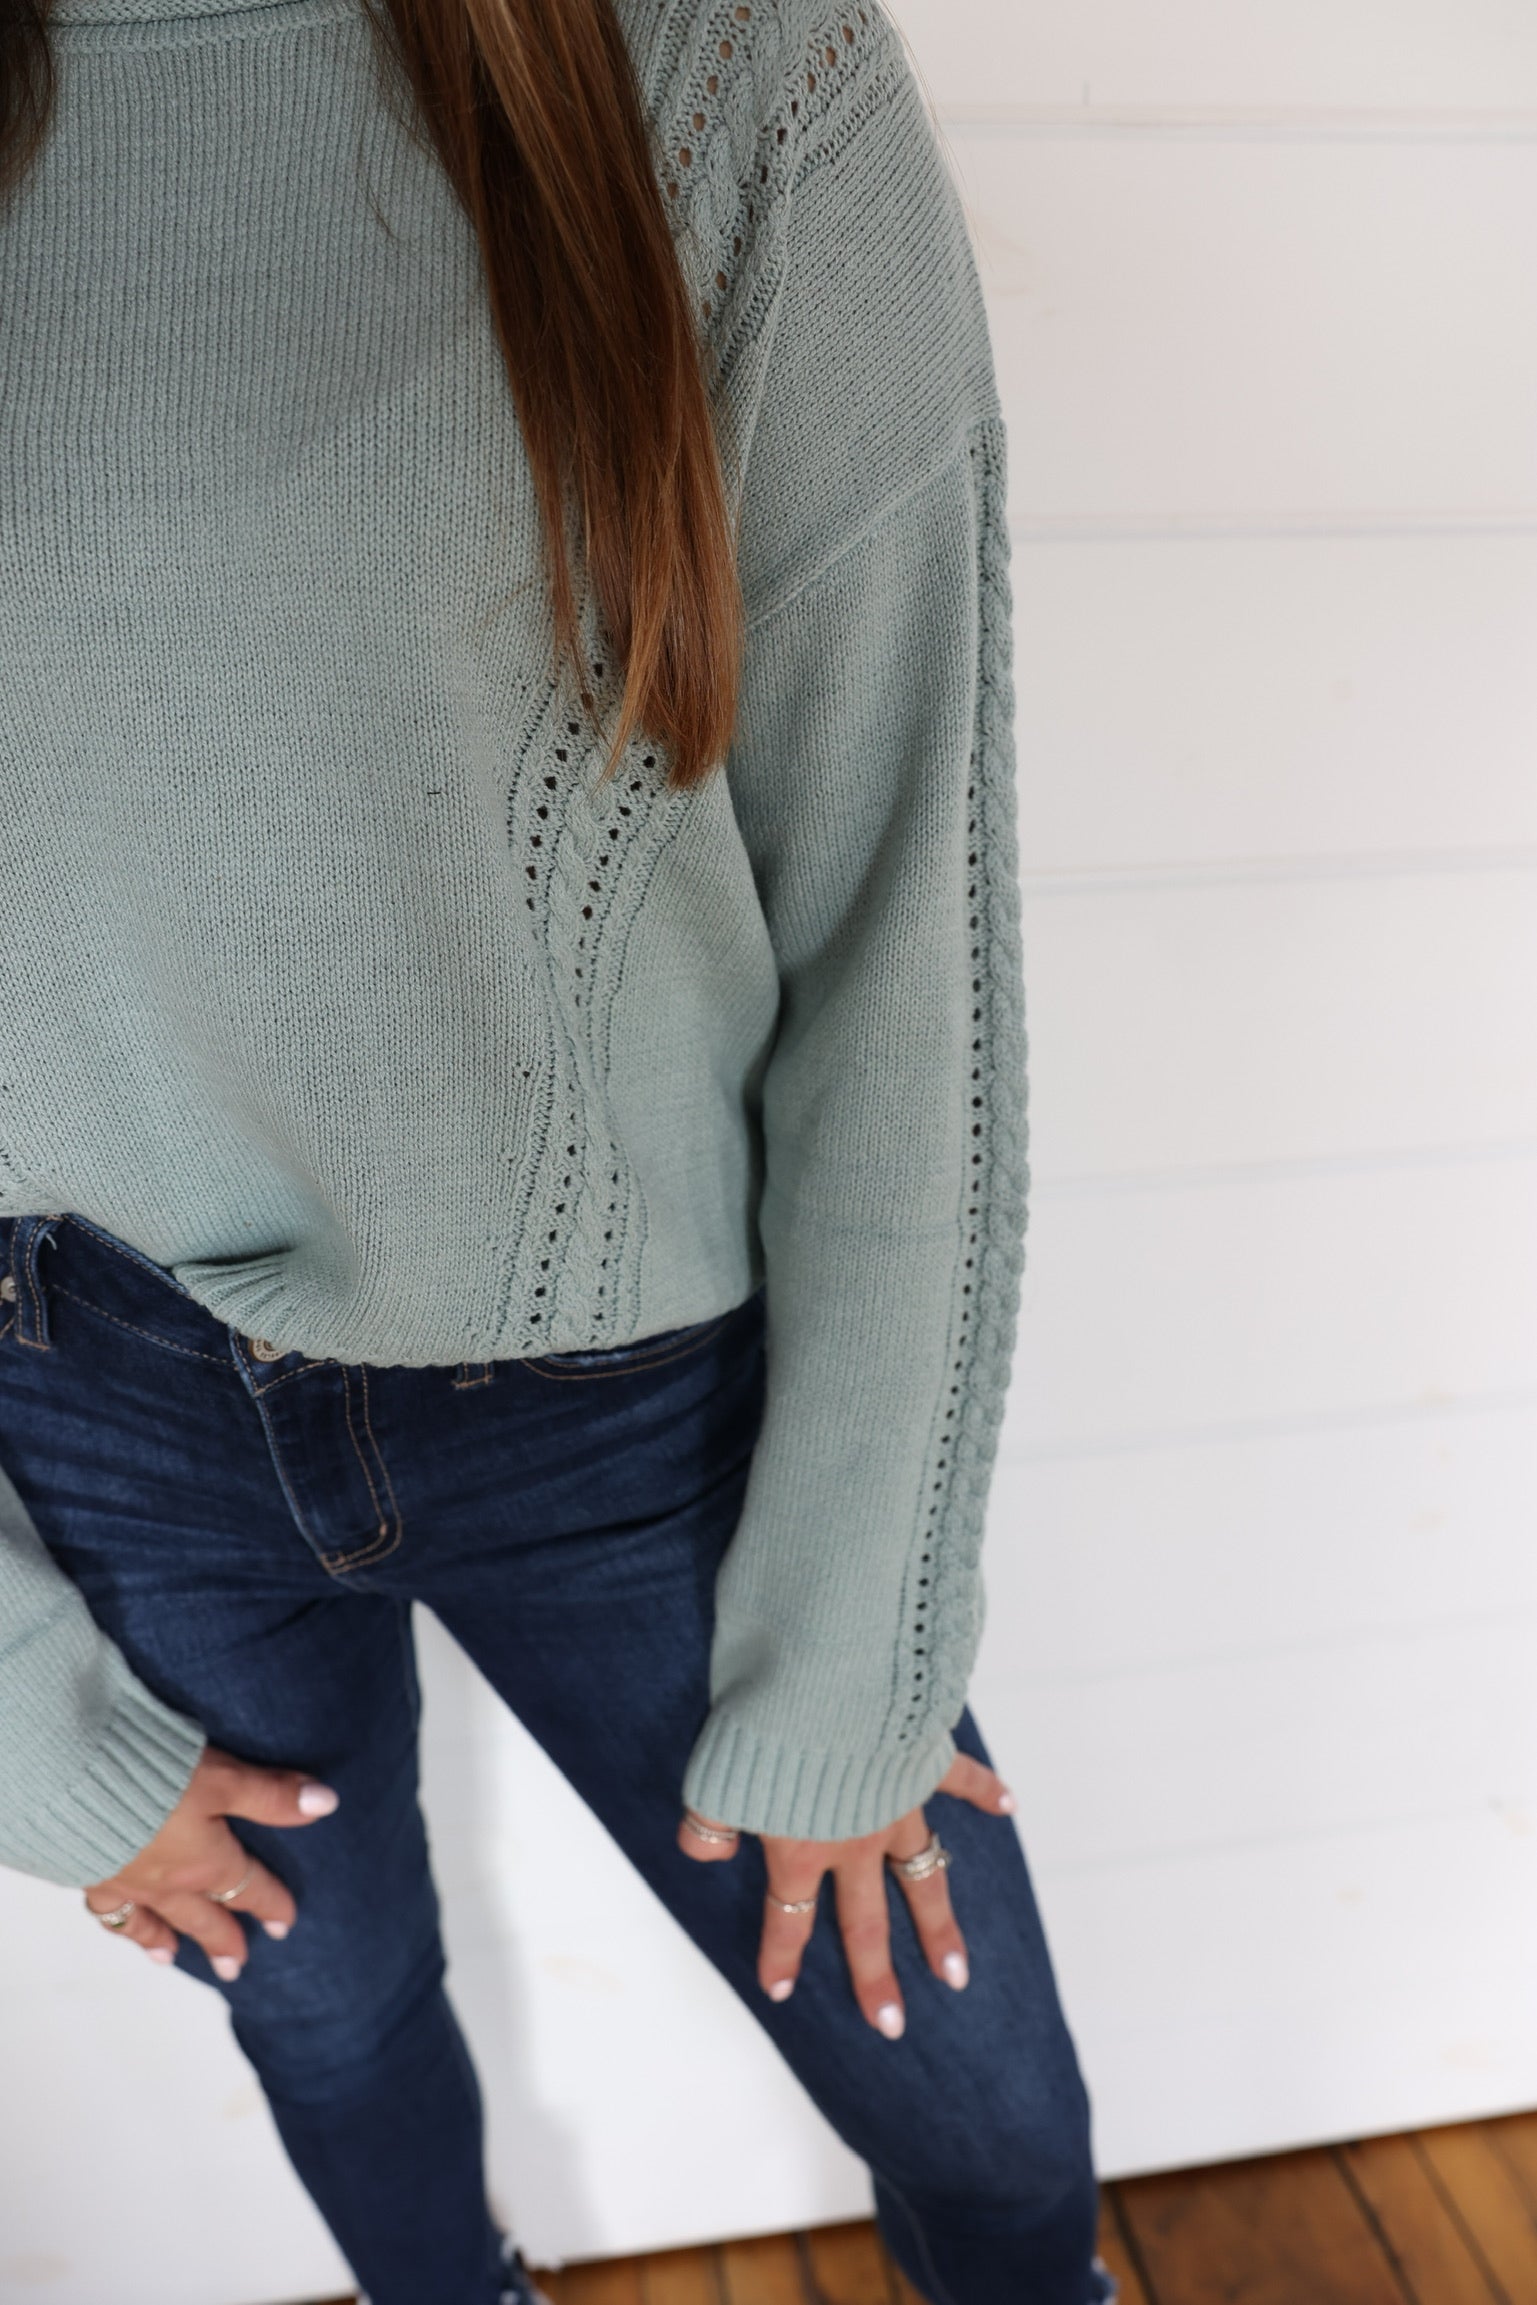 Cable Detail Sweater Top (One Left - Size S)